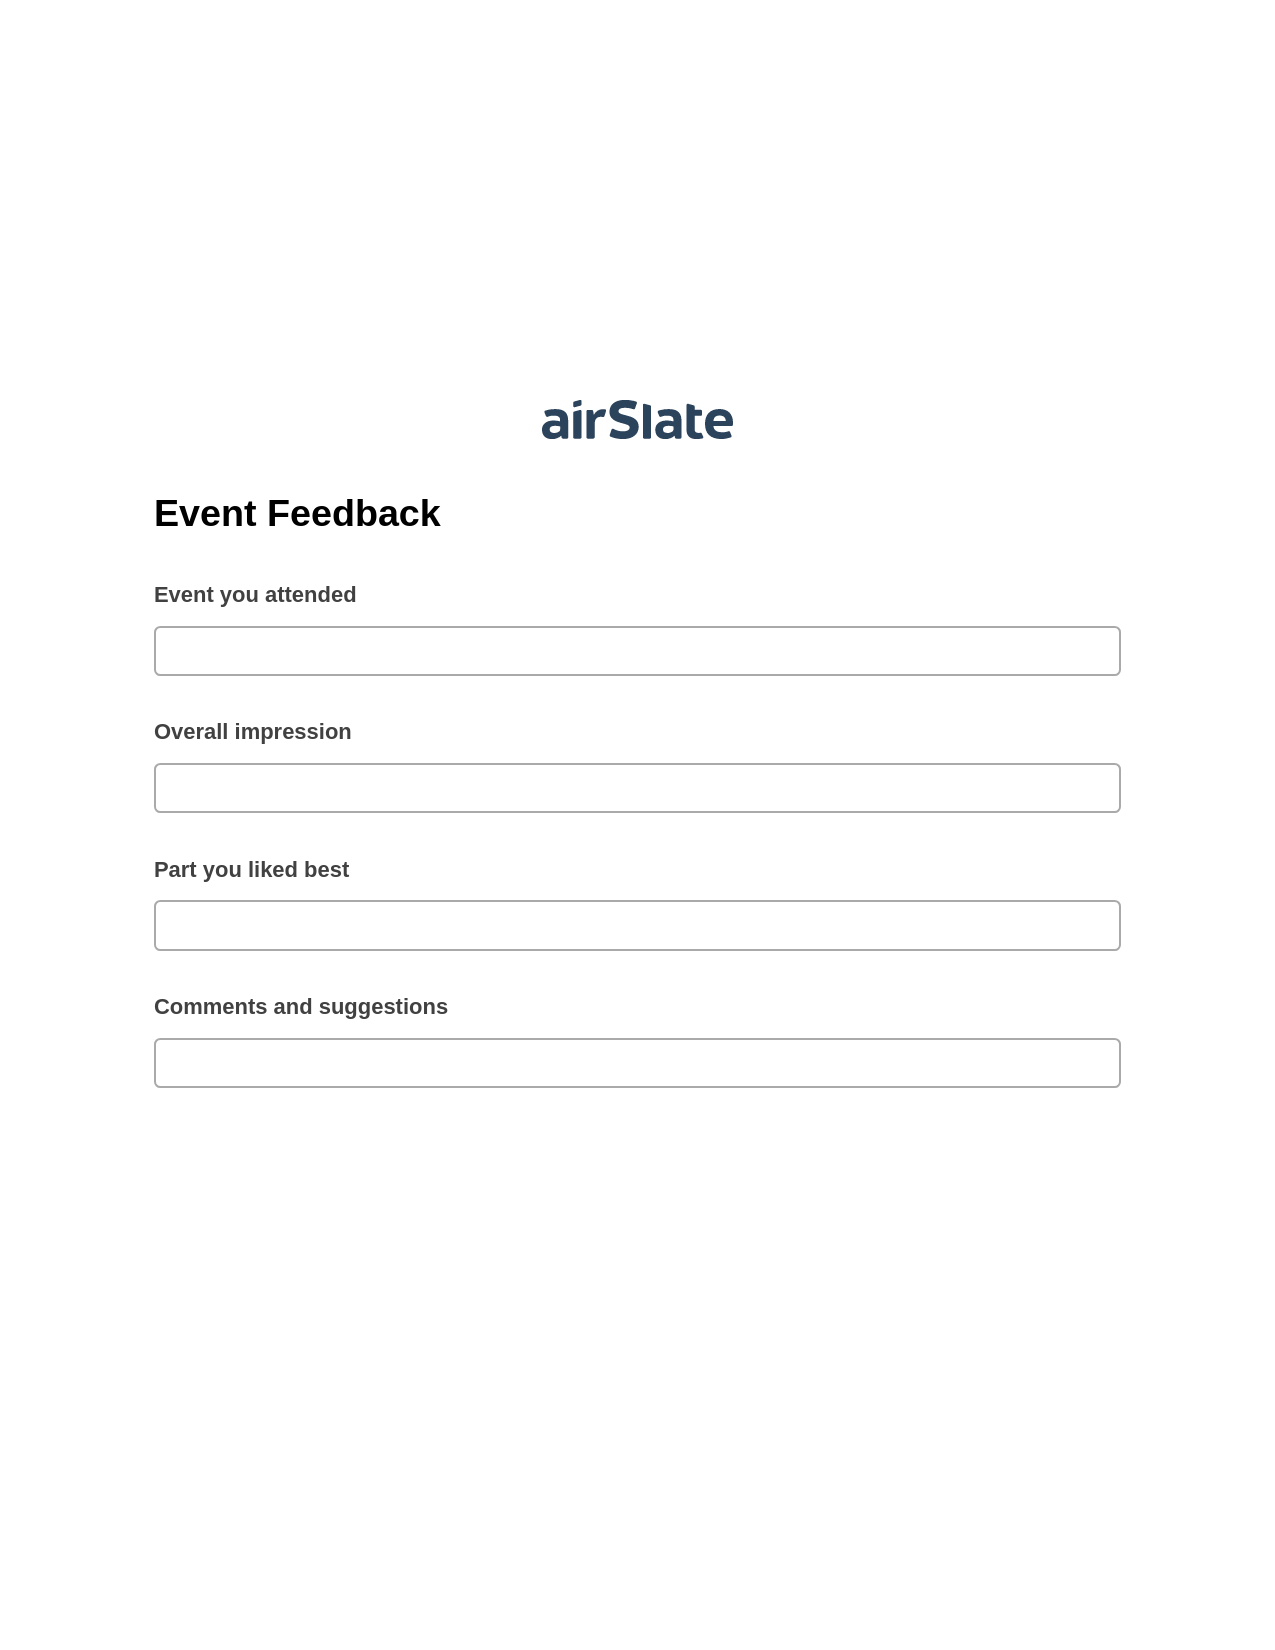 Multirole Event Feedback Pre-fill from Salesforce Records with SOQL Bot, Lock the slate bot, Export to NetSuite Record Bot